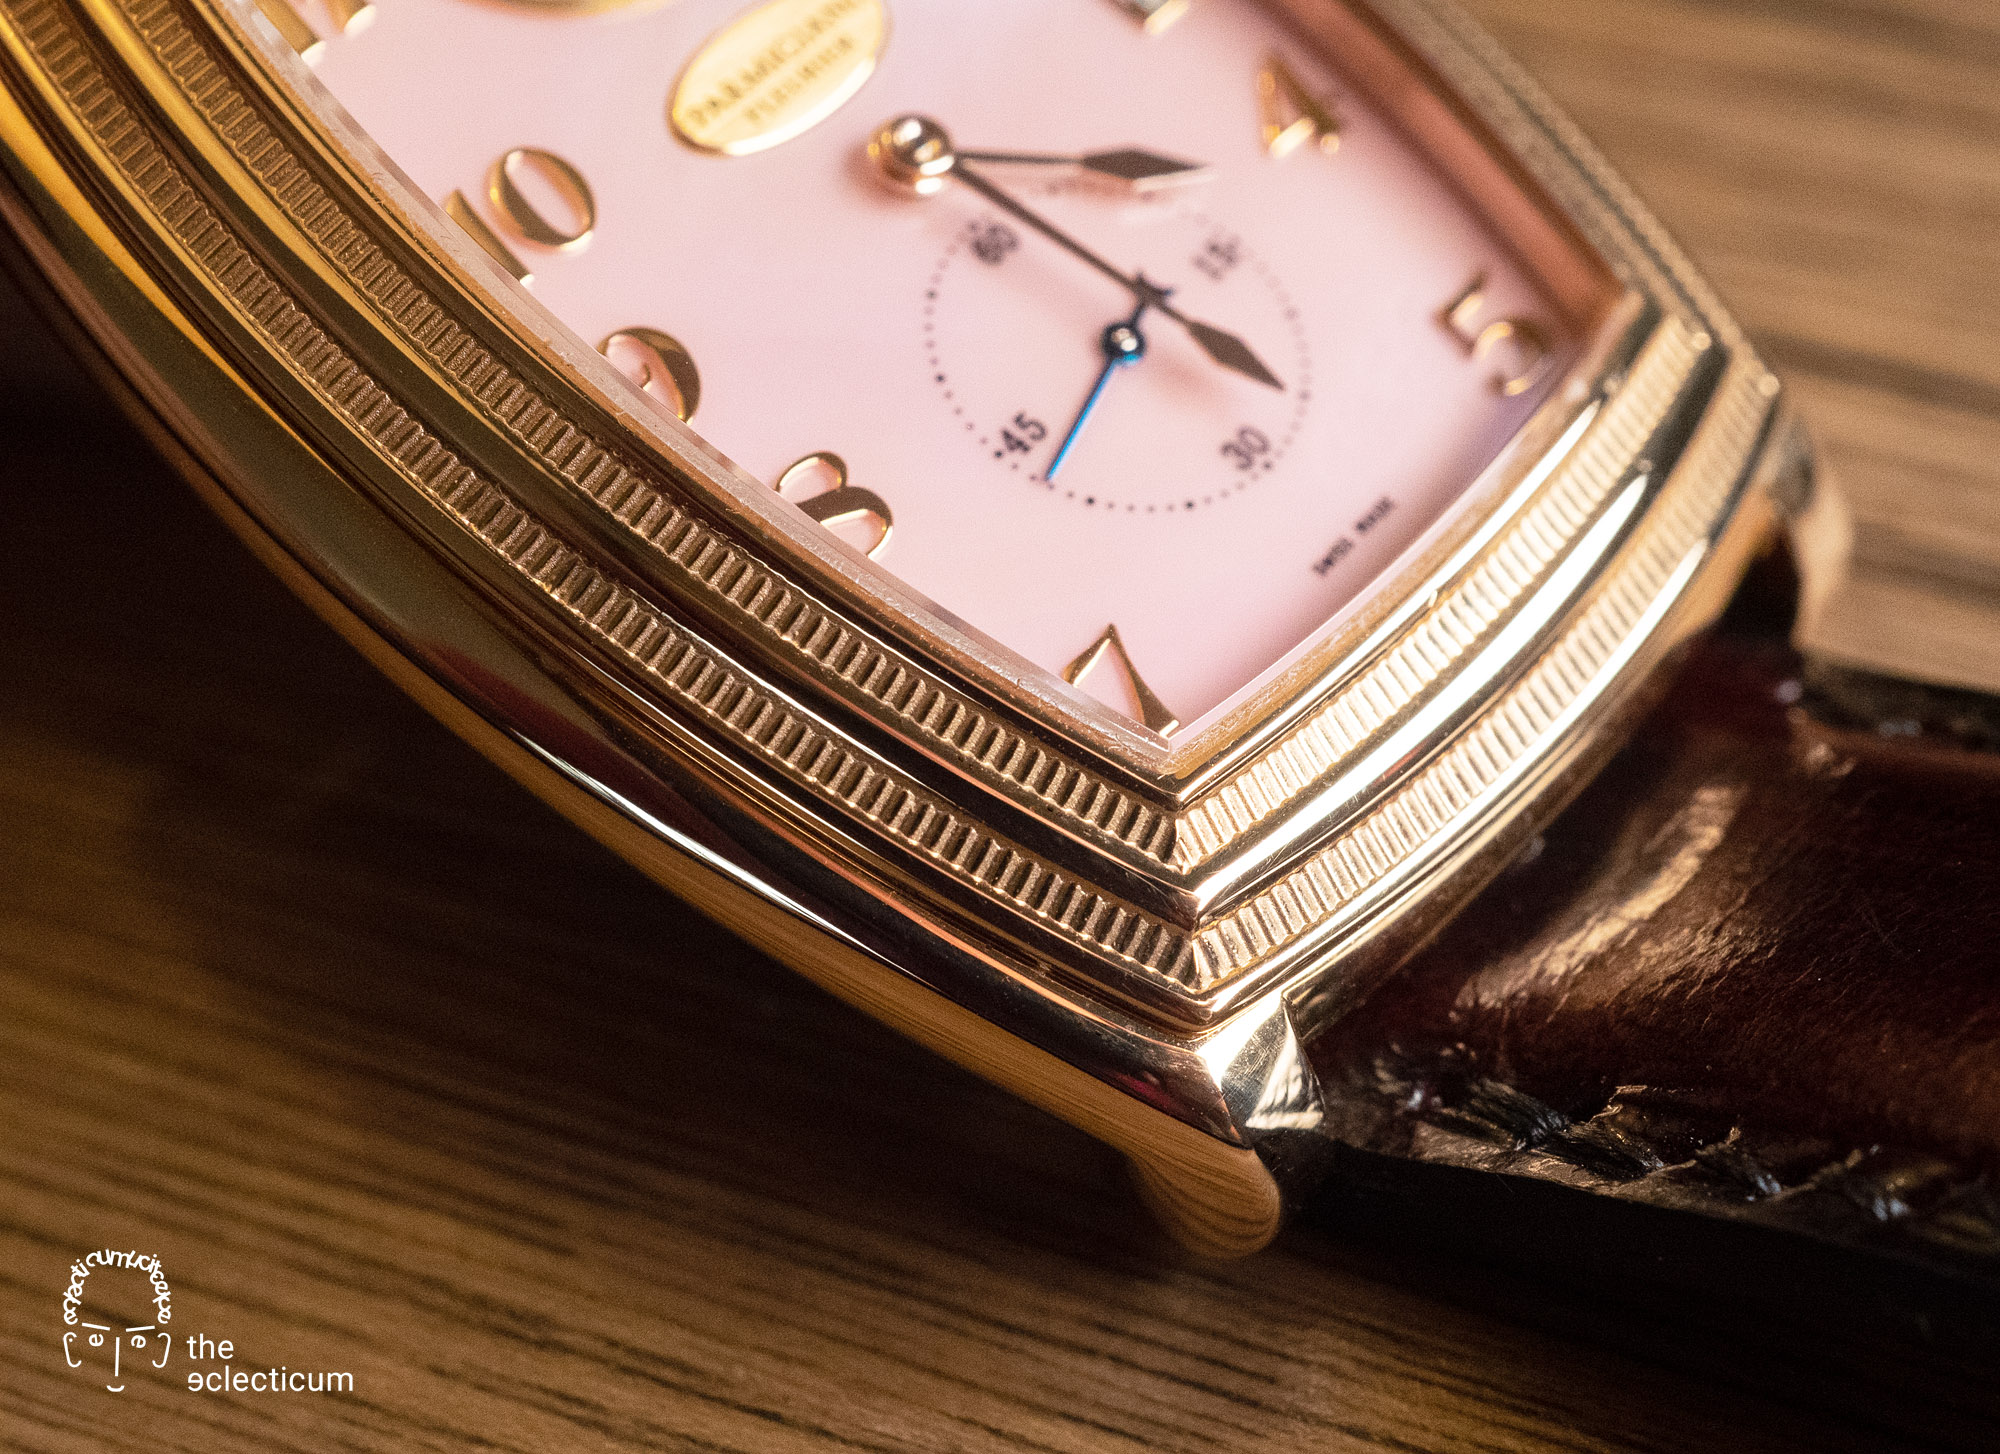 Parmigiani Ionica Hebdomadaire red gold mother-of-pearl